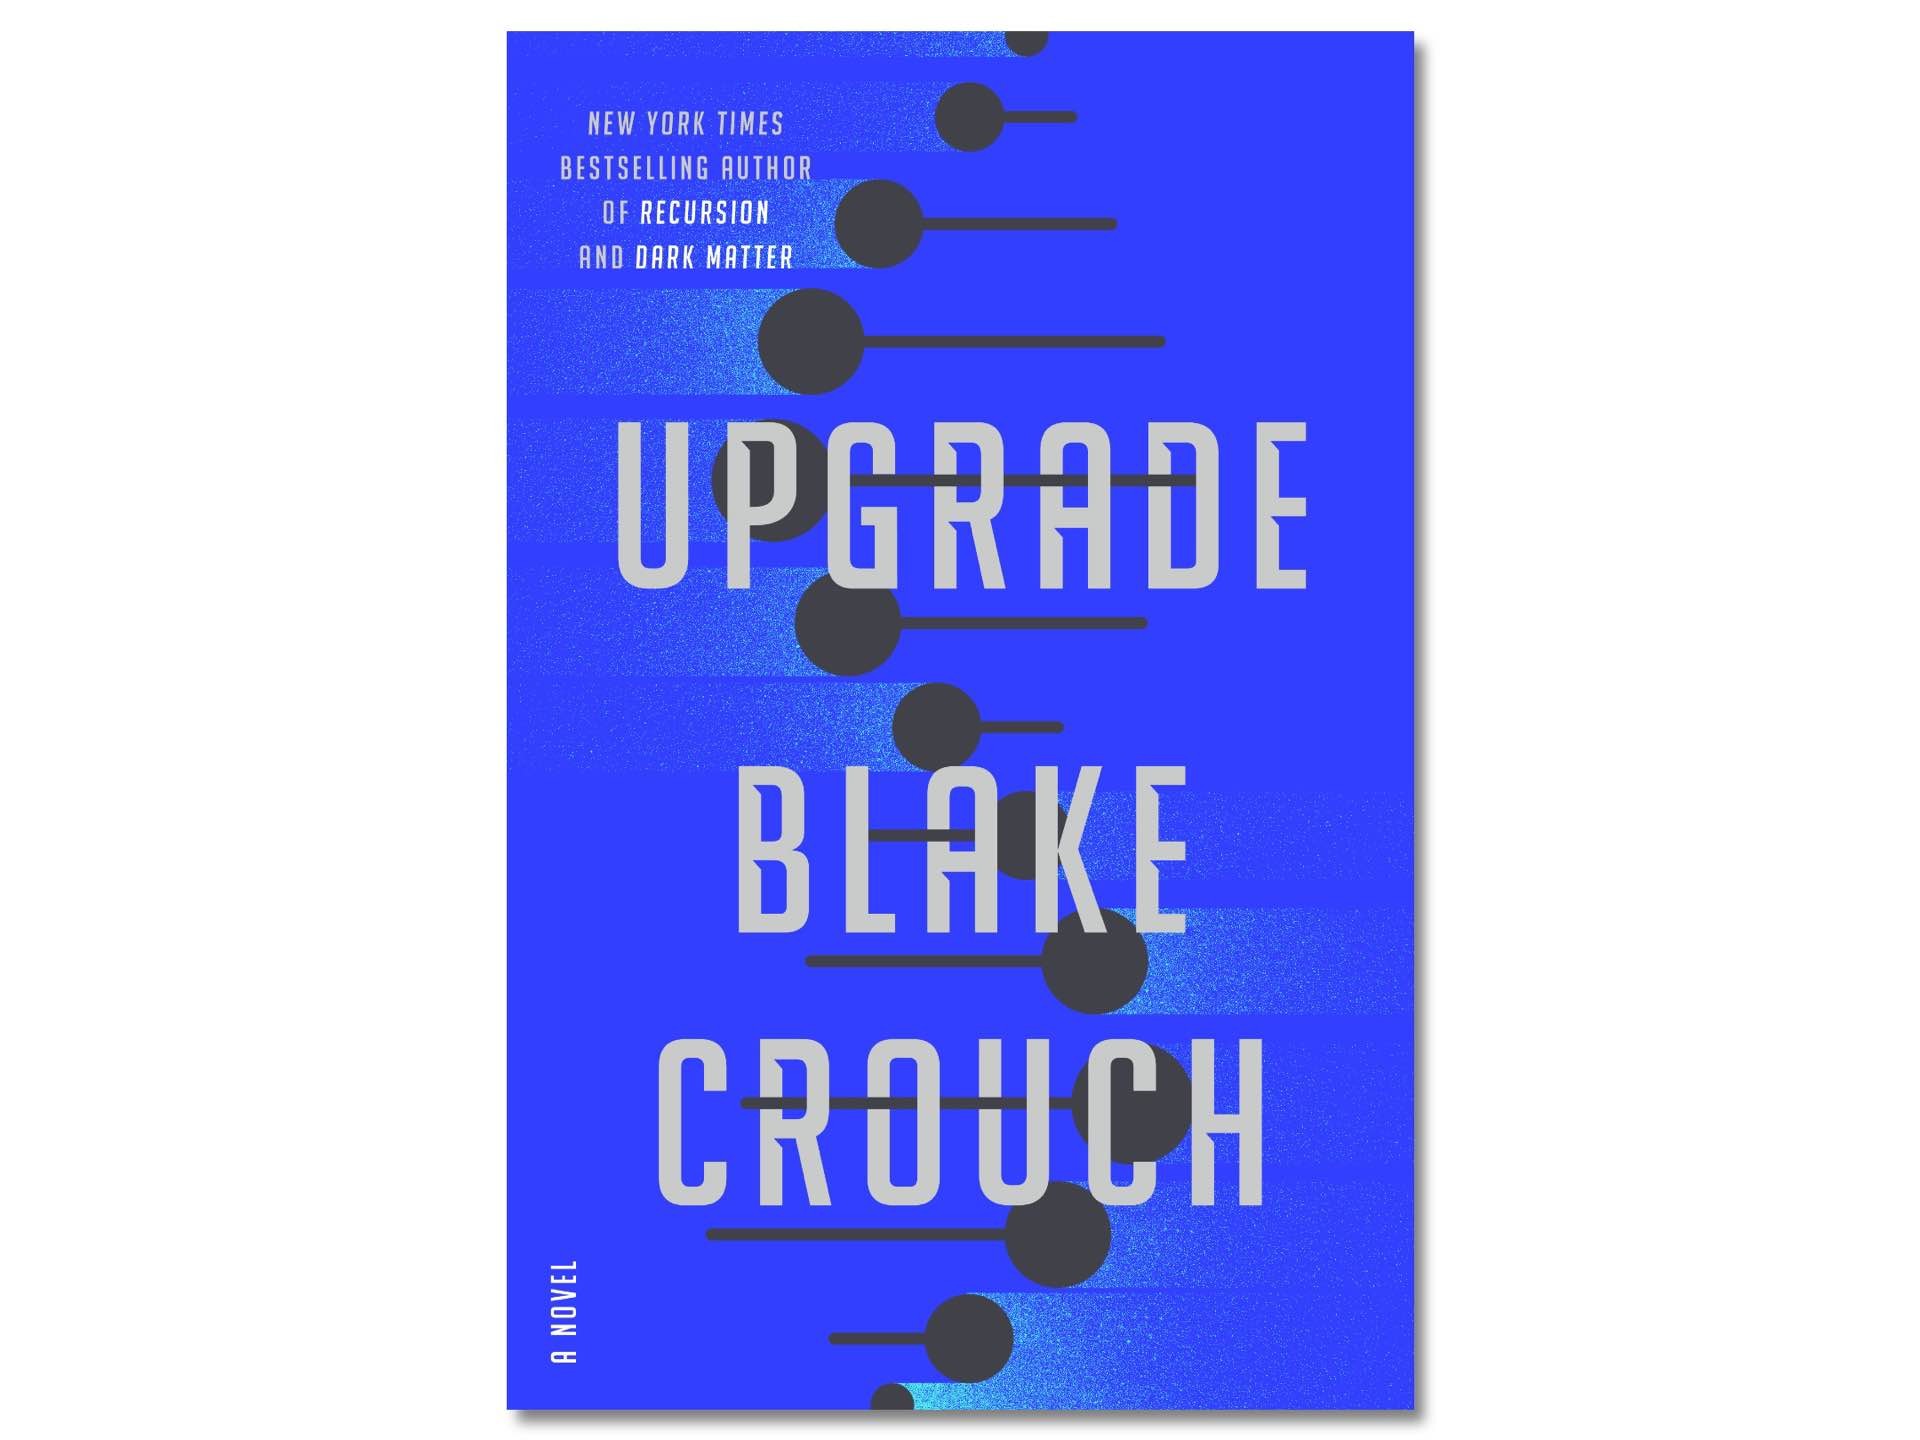 ‘Upgrade’ by Blake Crouch